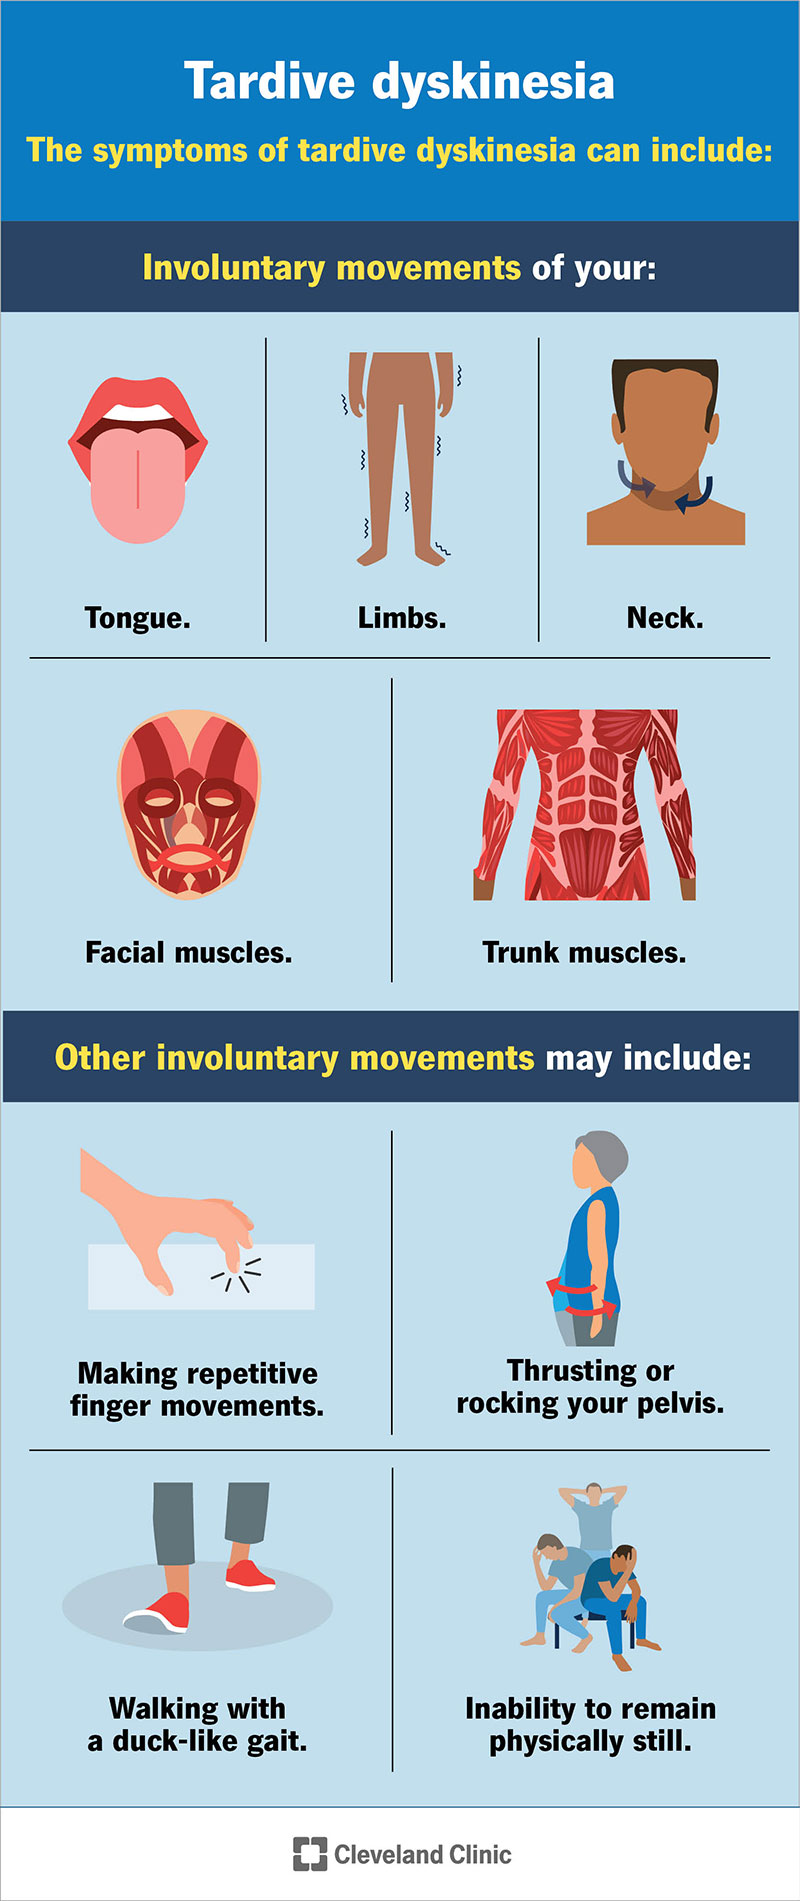 Symptoms of tradive dyskinesia include involuntary movements of your tongue, limbs, neck, facial muscles and more.